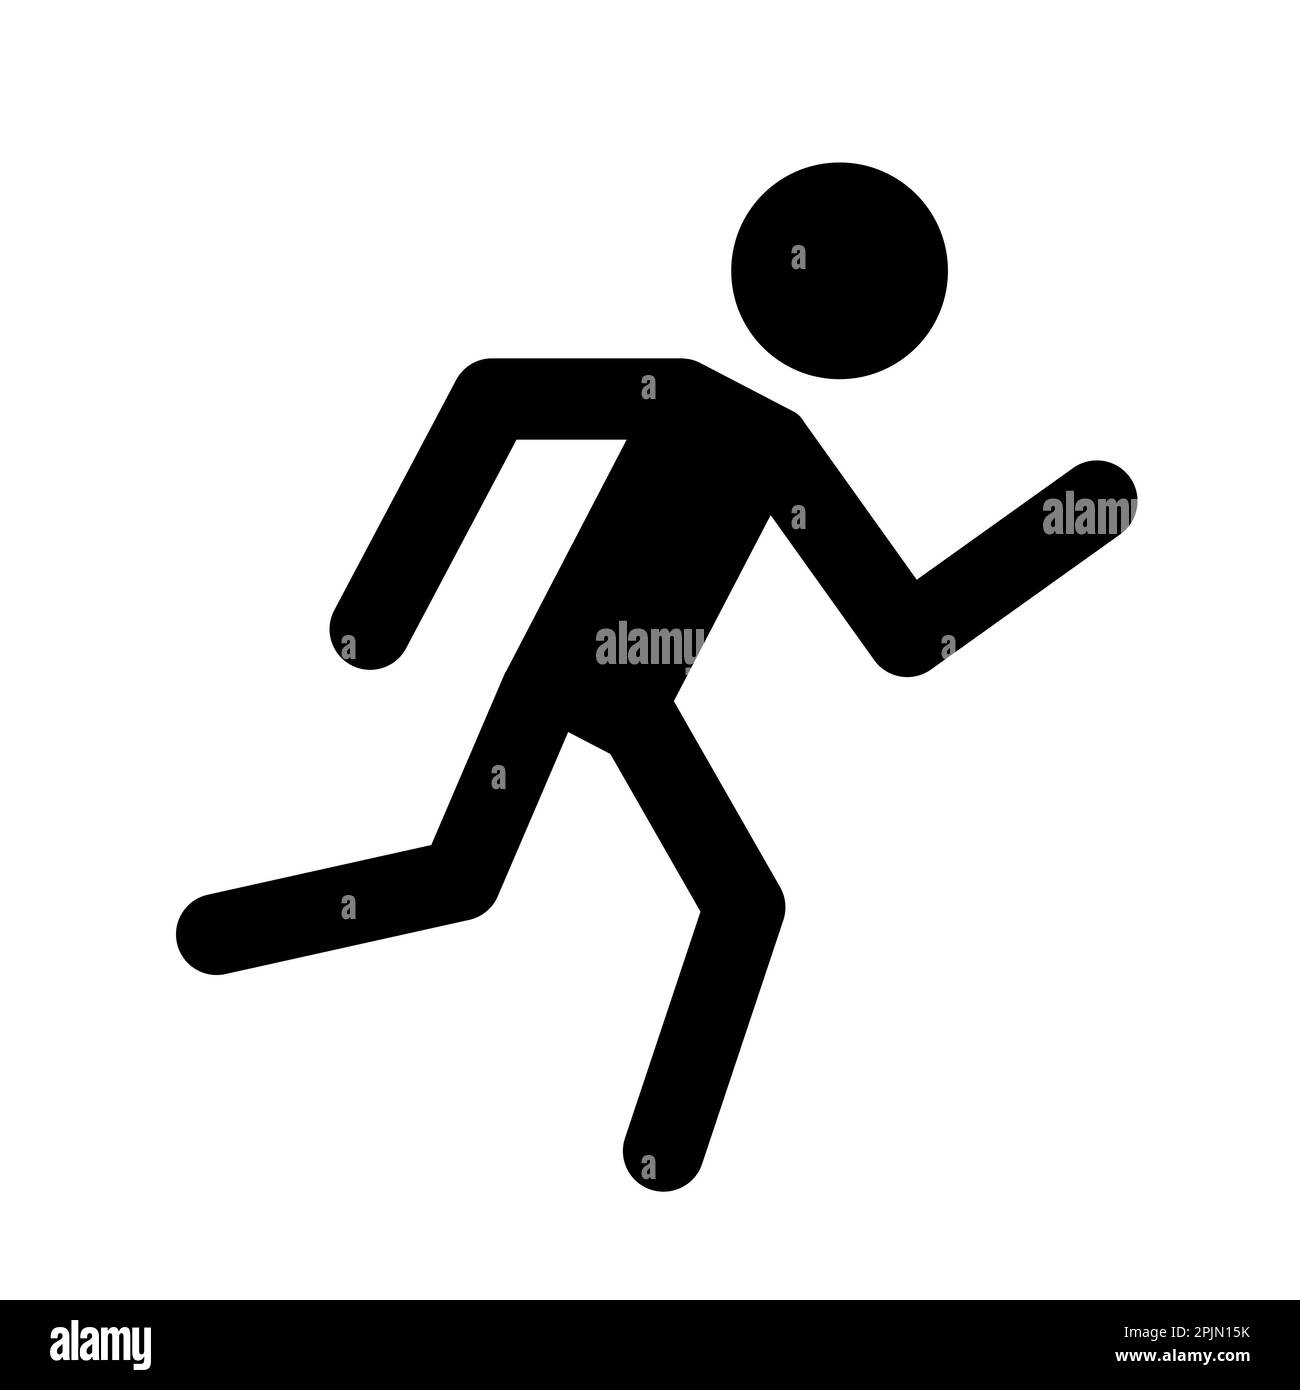 Running sport icon. Athlete silhouette symbol on isolated